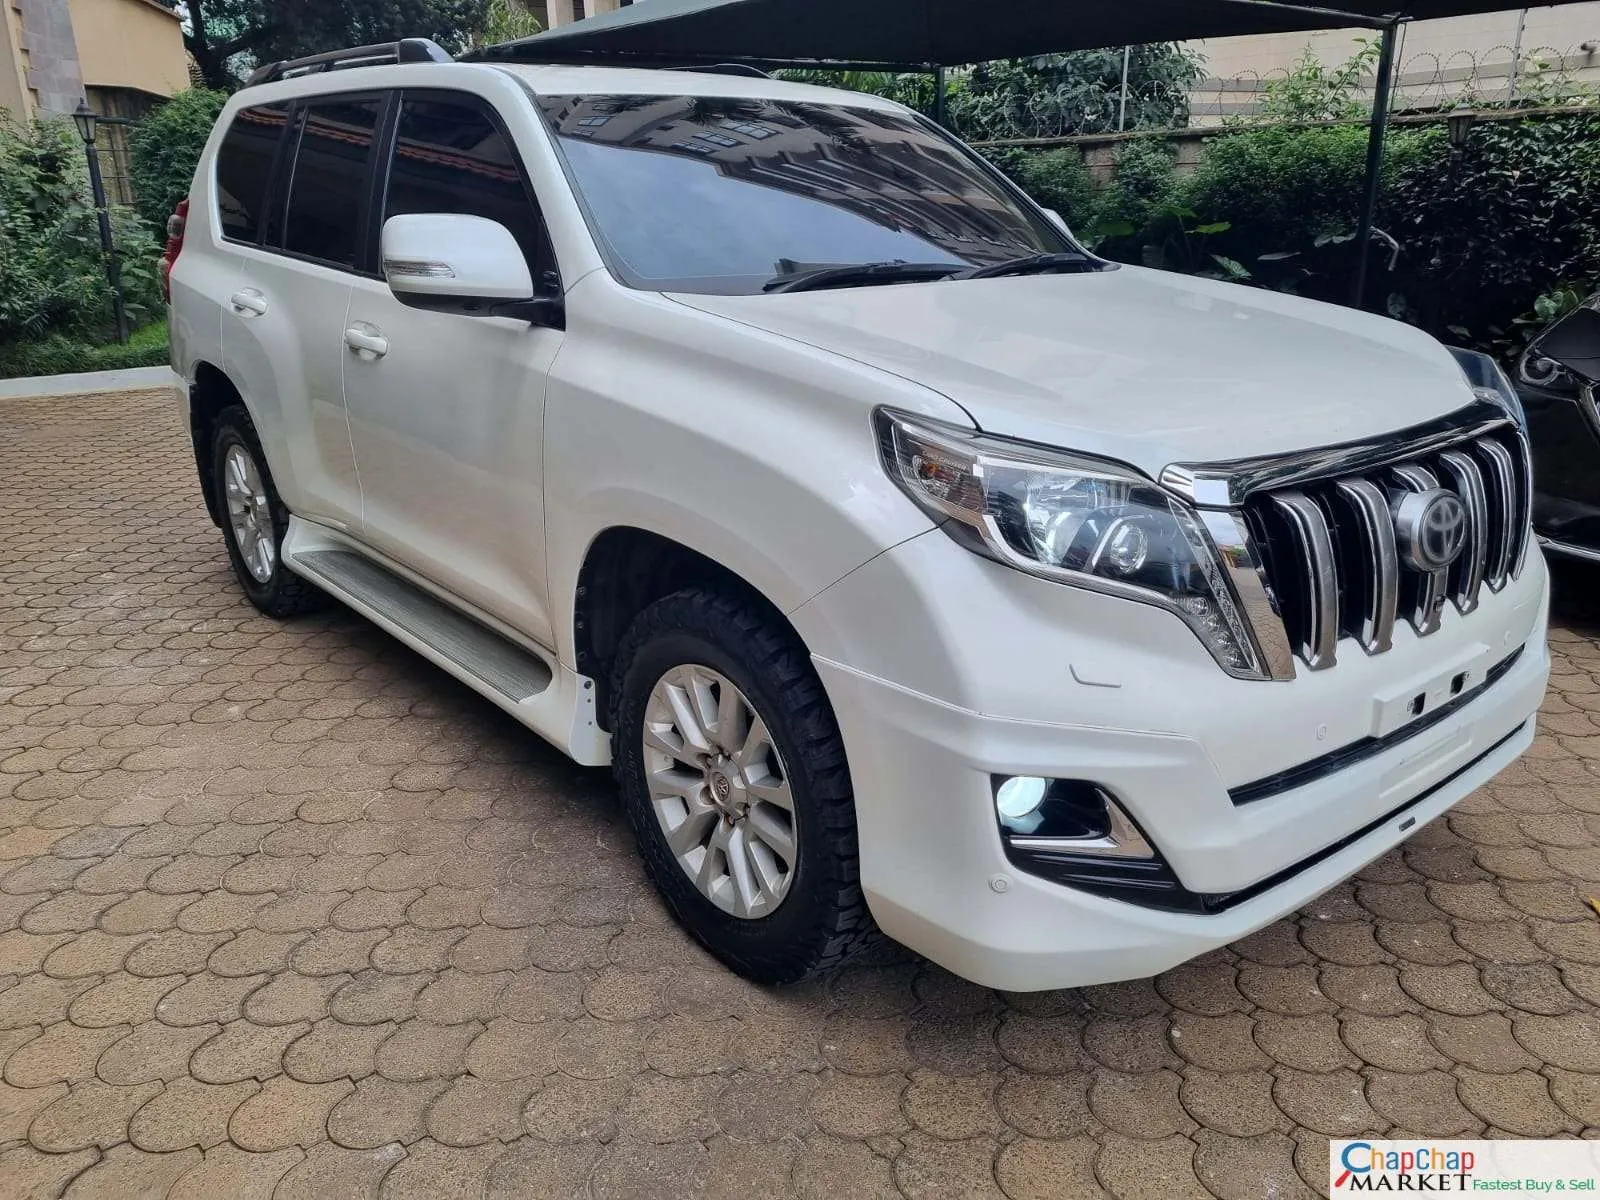 Toyota Prado TZG QUICK SALE Fully loaded trade in Ok EXCLUSIVE Hire purchase installments